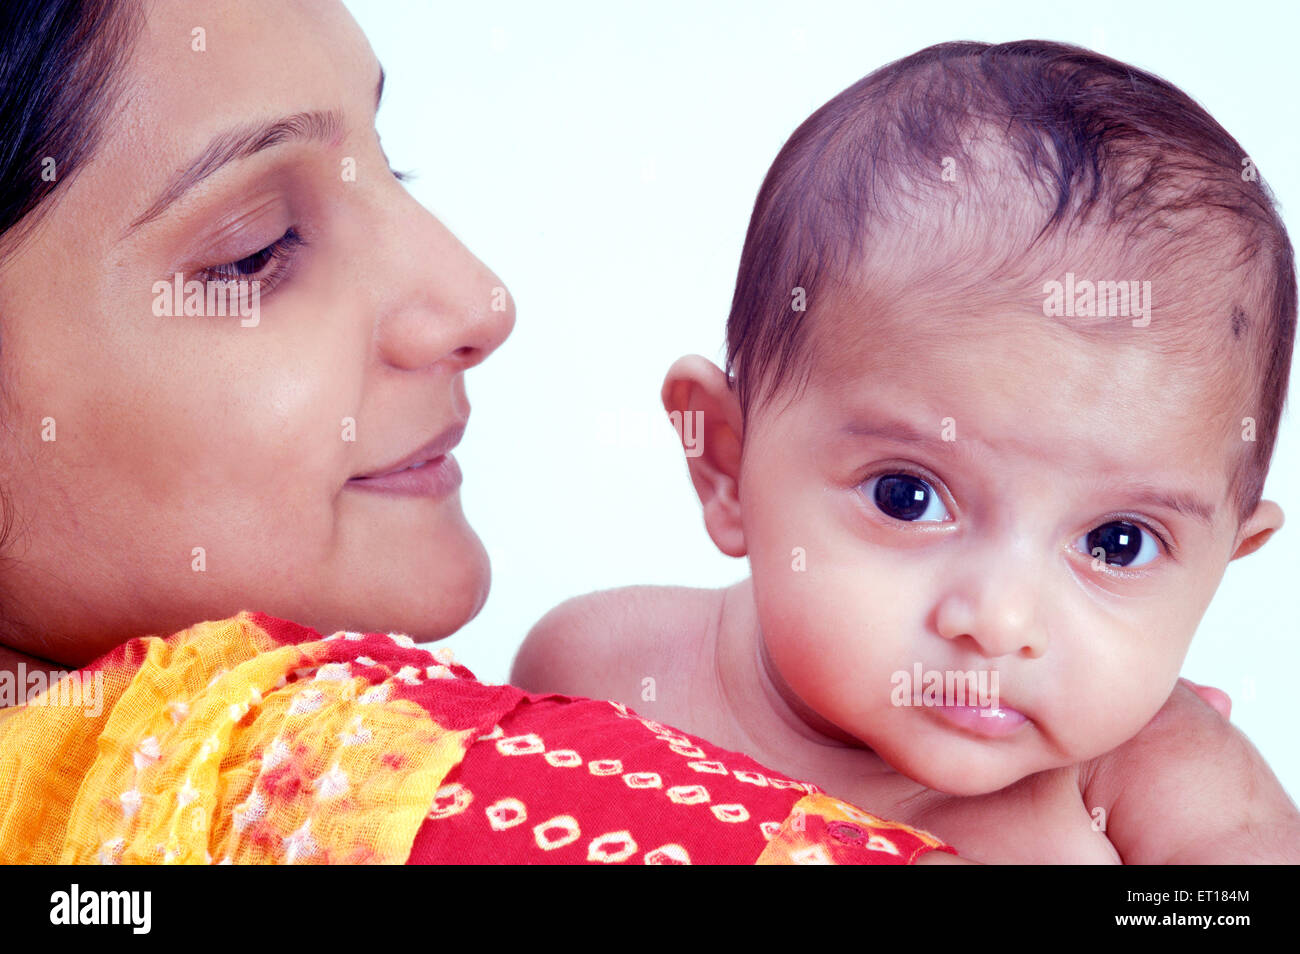 Indian Mother Child faces close up - MR#736K and MR#736LA Stock Photo